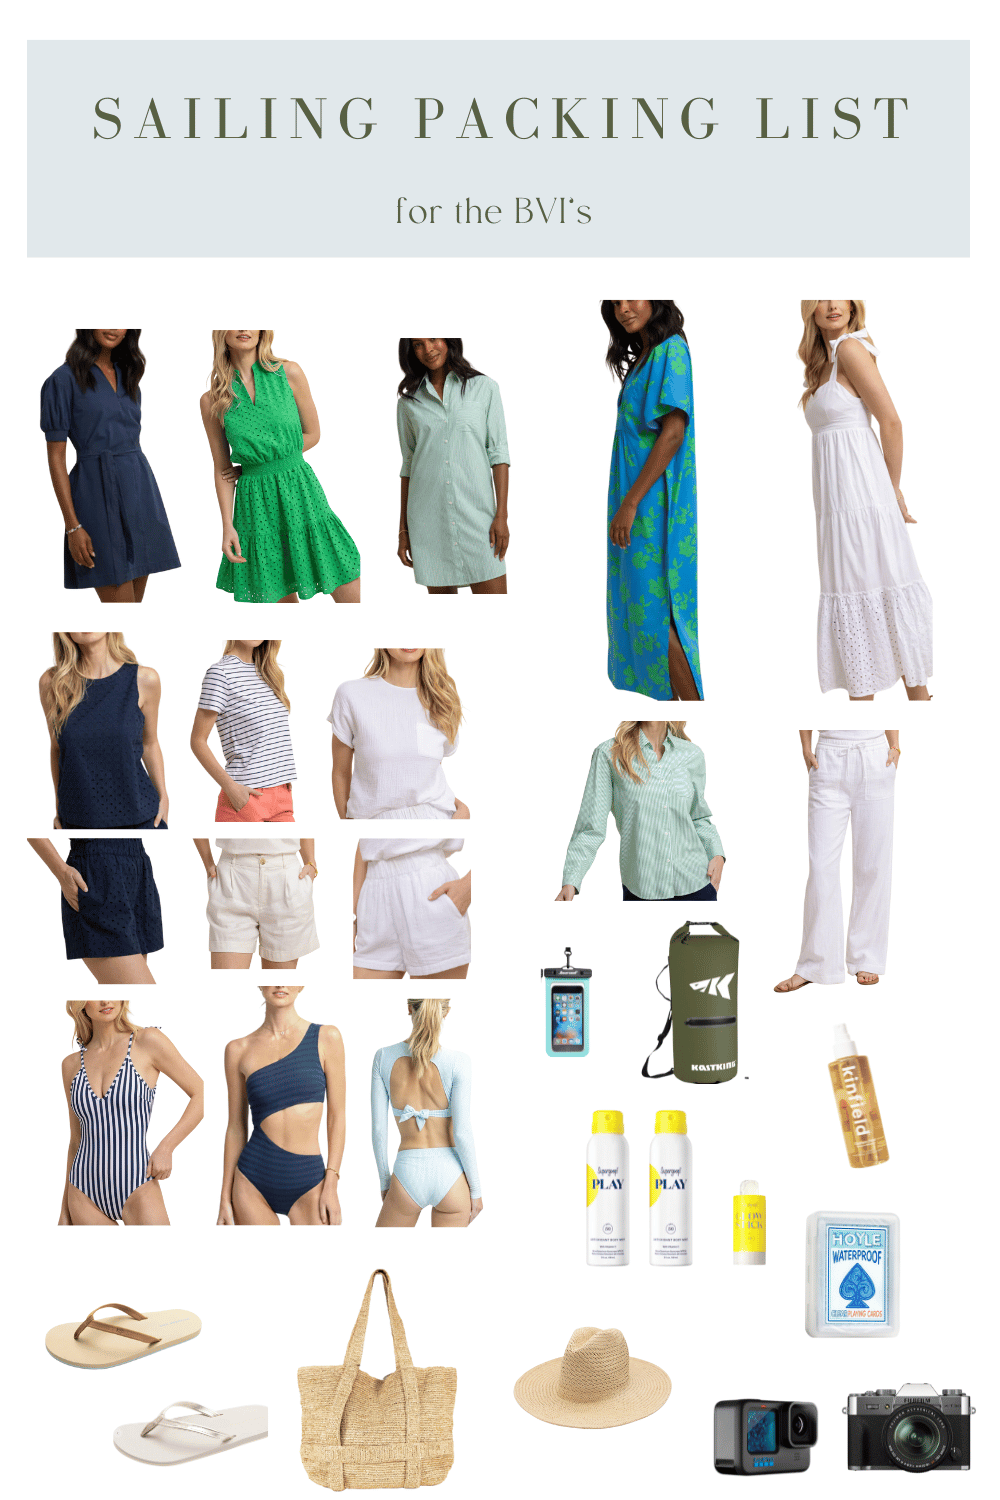 southern tide moorings yacht trip packing list